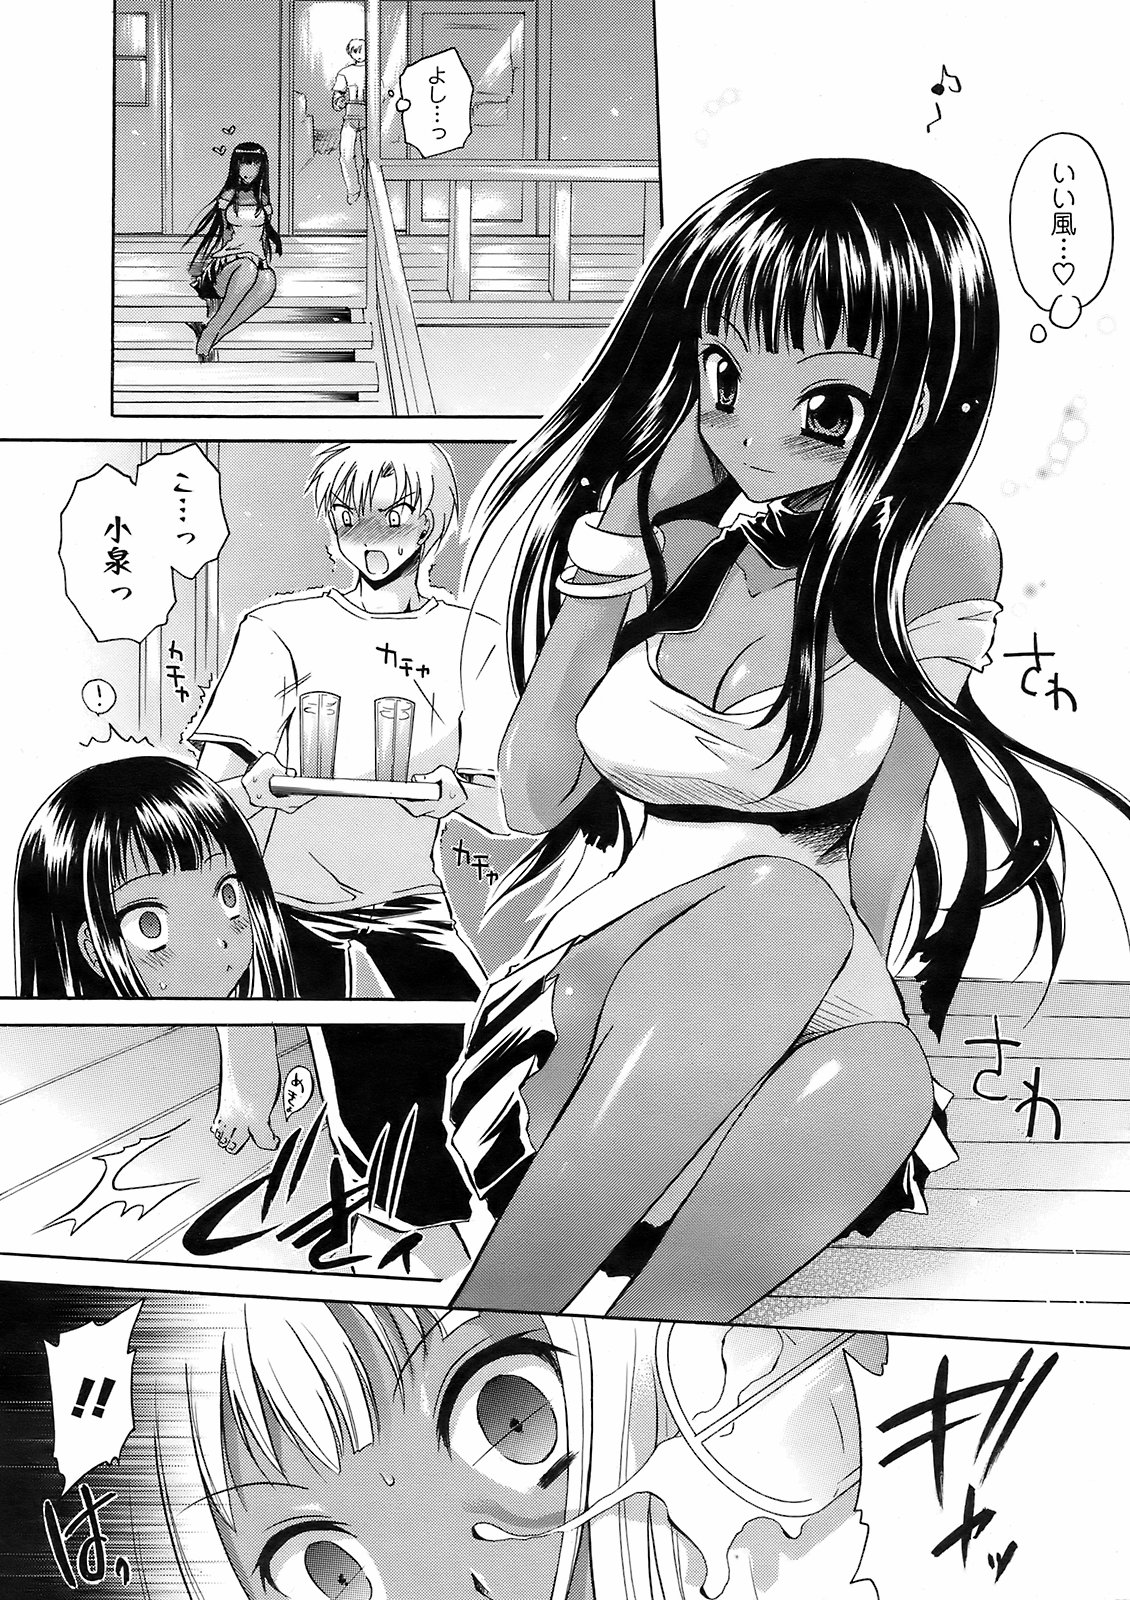 Men's Young Special Ikazuchi Vol 08 page 12 full